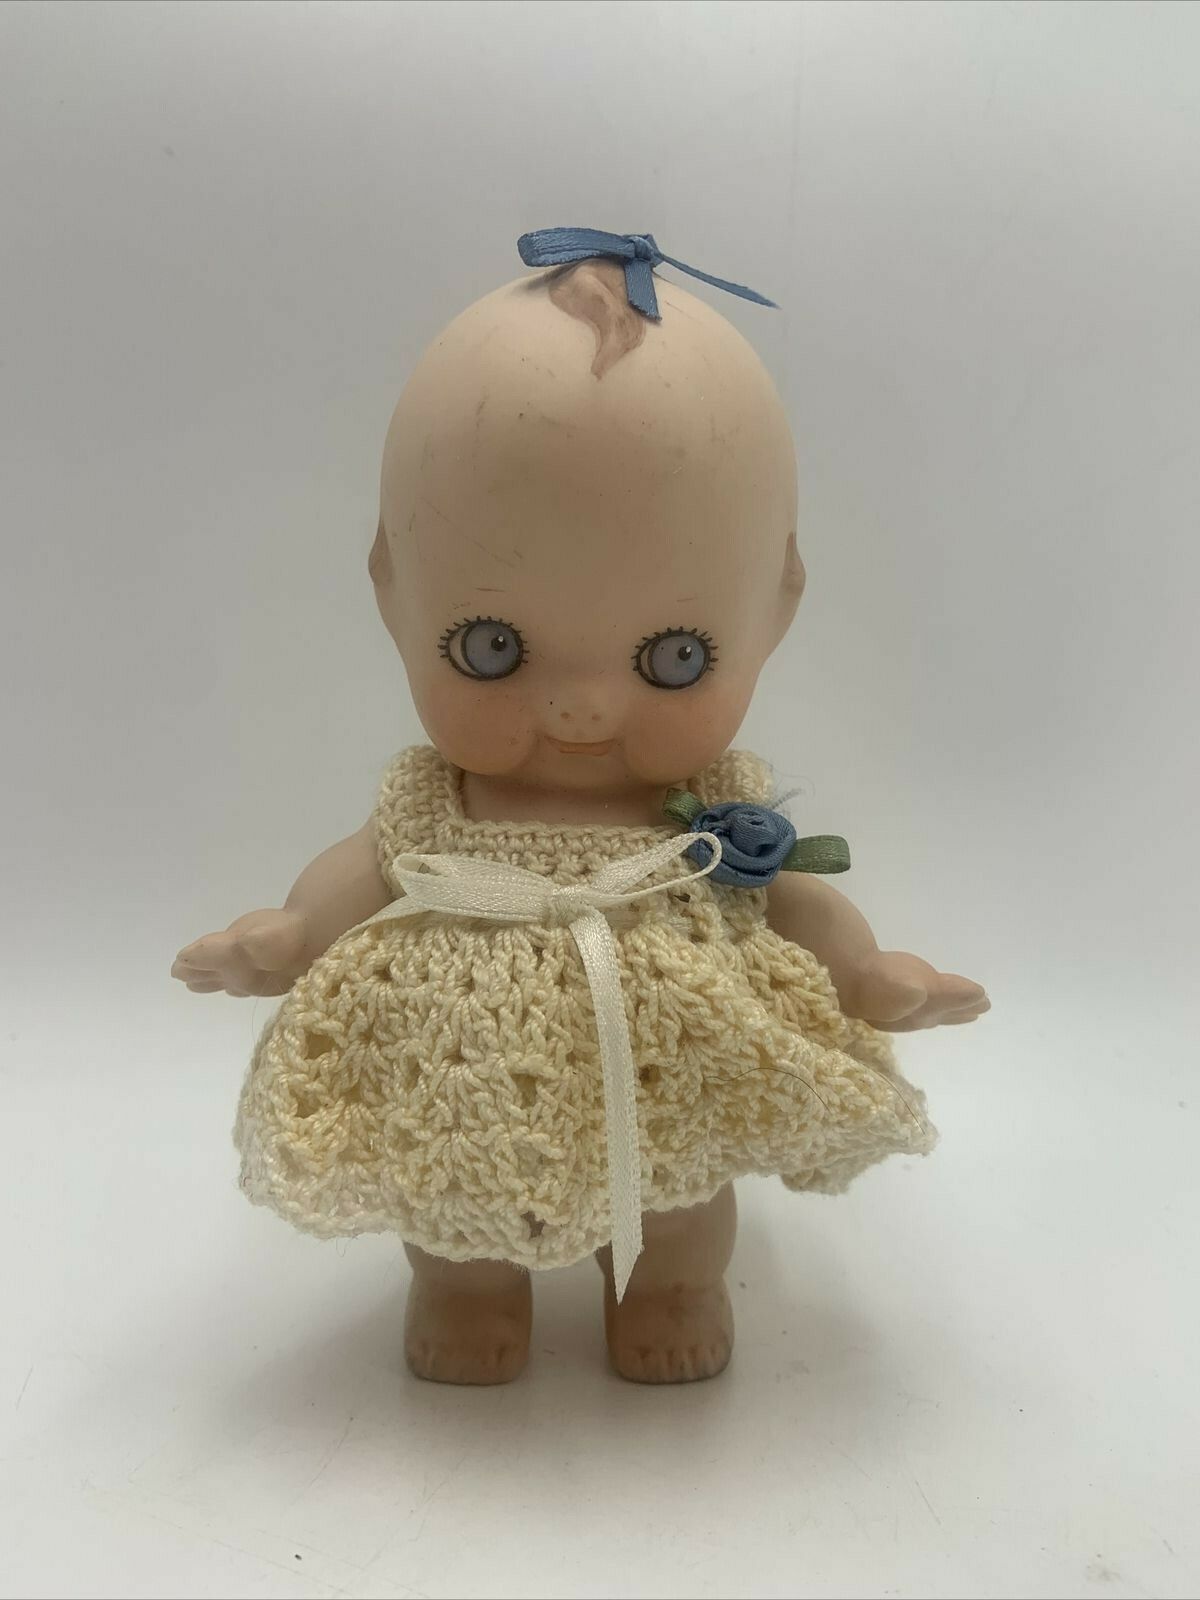 Vintage Kewpie Doll Bisque Porcelain Blue Eyes Wings Crochet Outfit 5 1/4" Tall